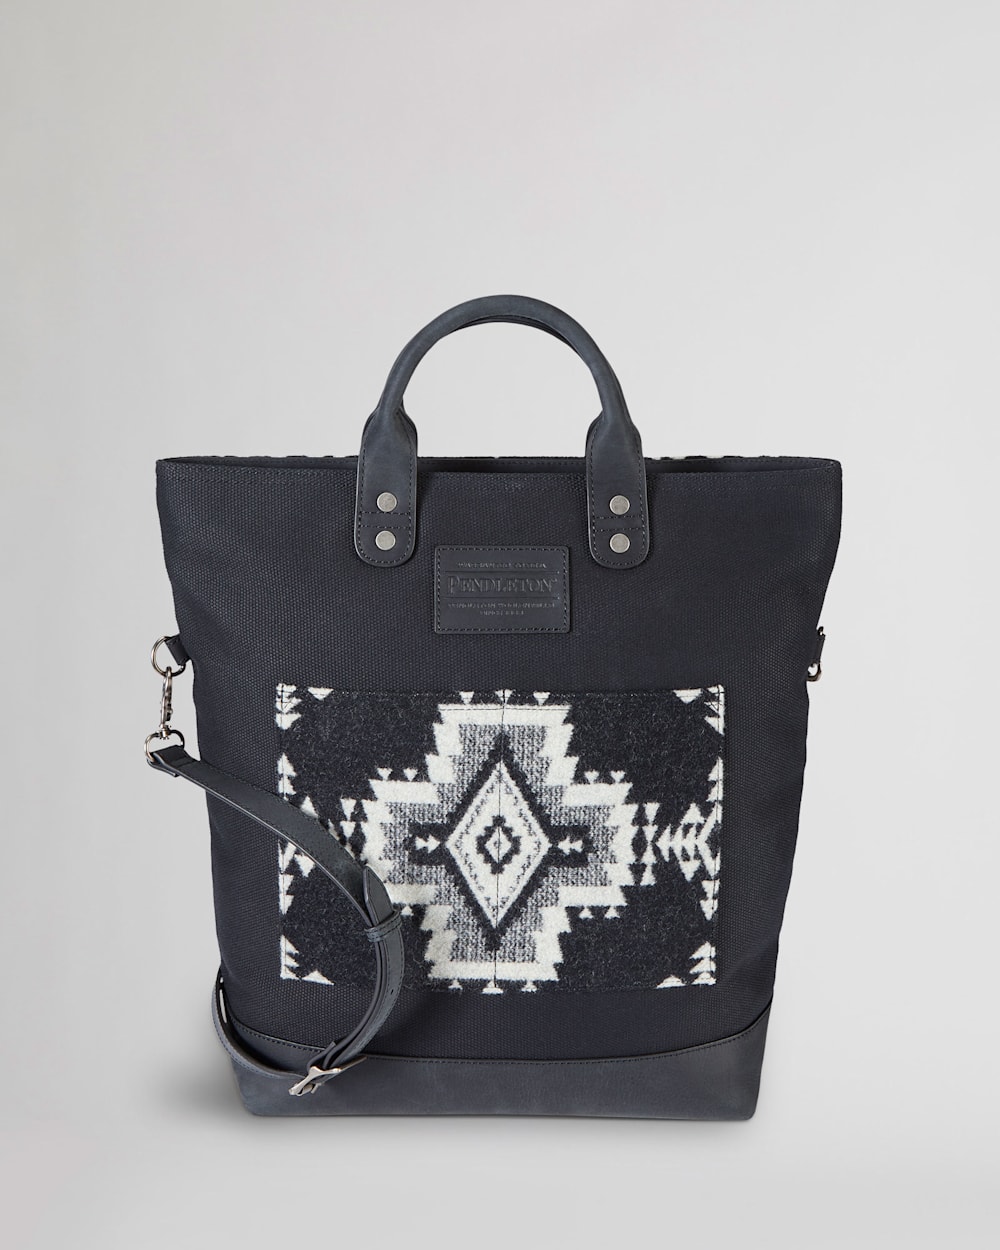 ROCK POINT LONG TOTE IN BLACK image number 1